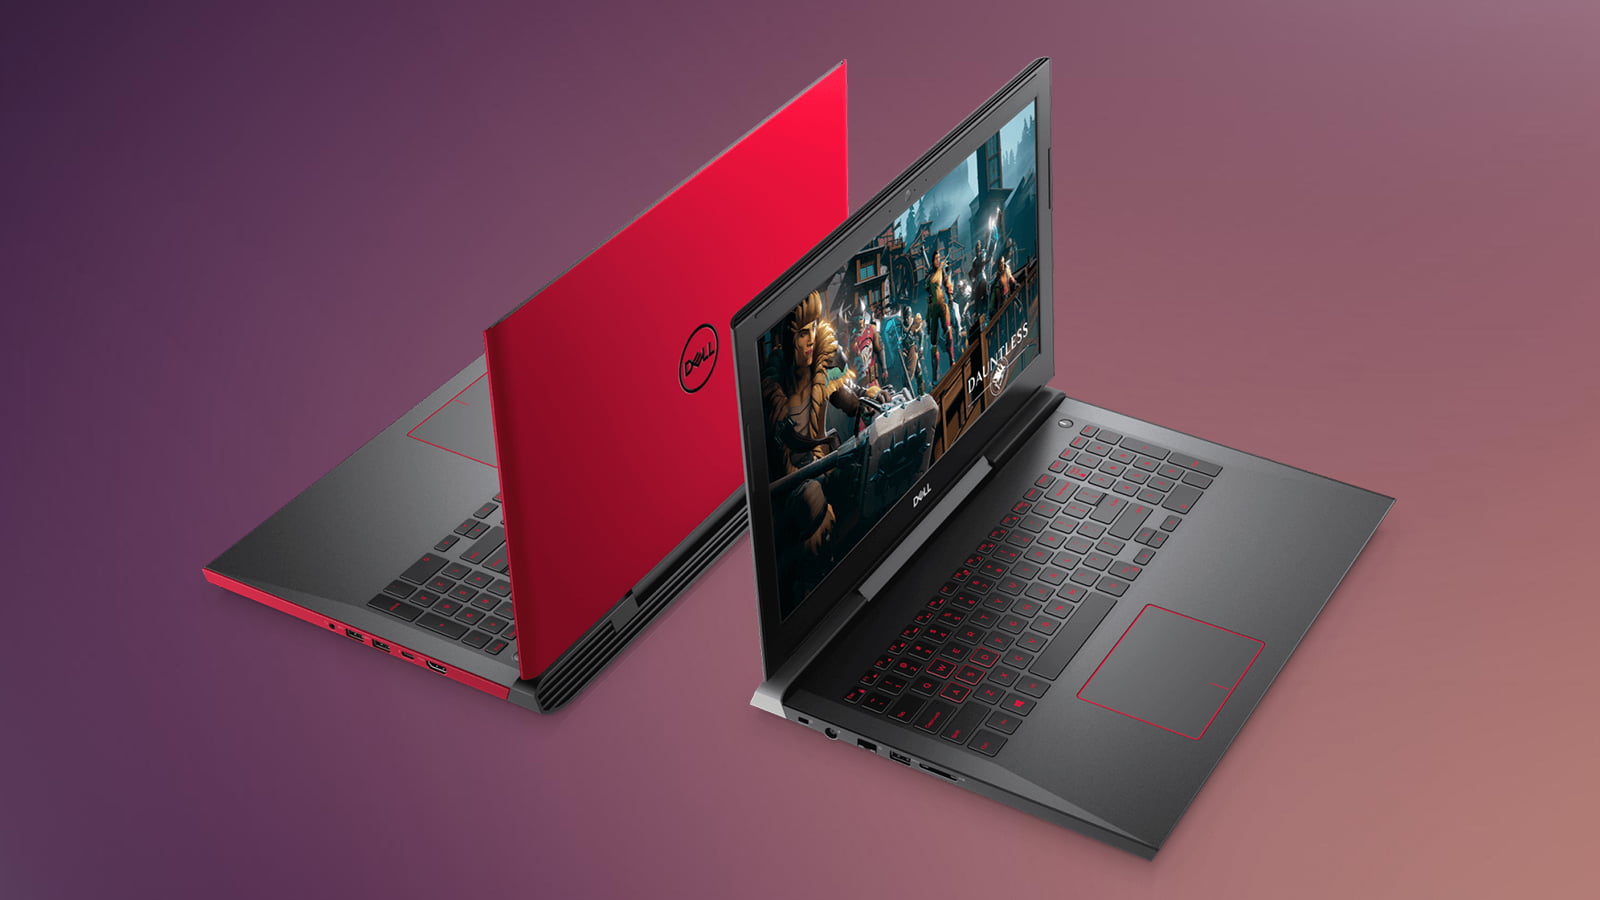 Black Friday Gaming Laptop Deals 2019 - 40+ Deals on Amazon!